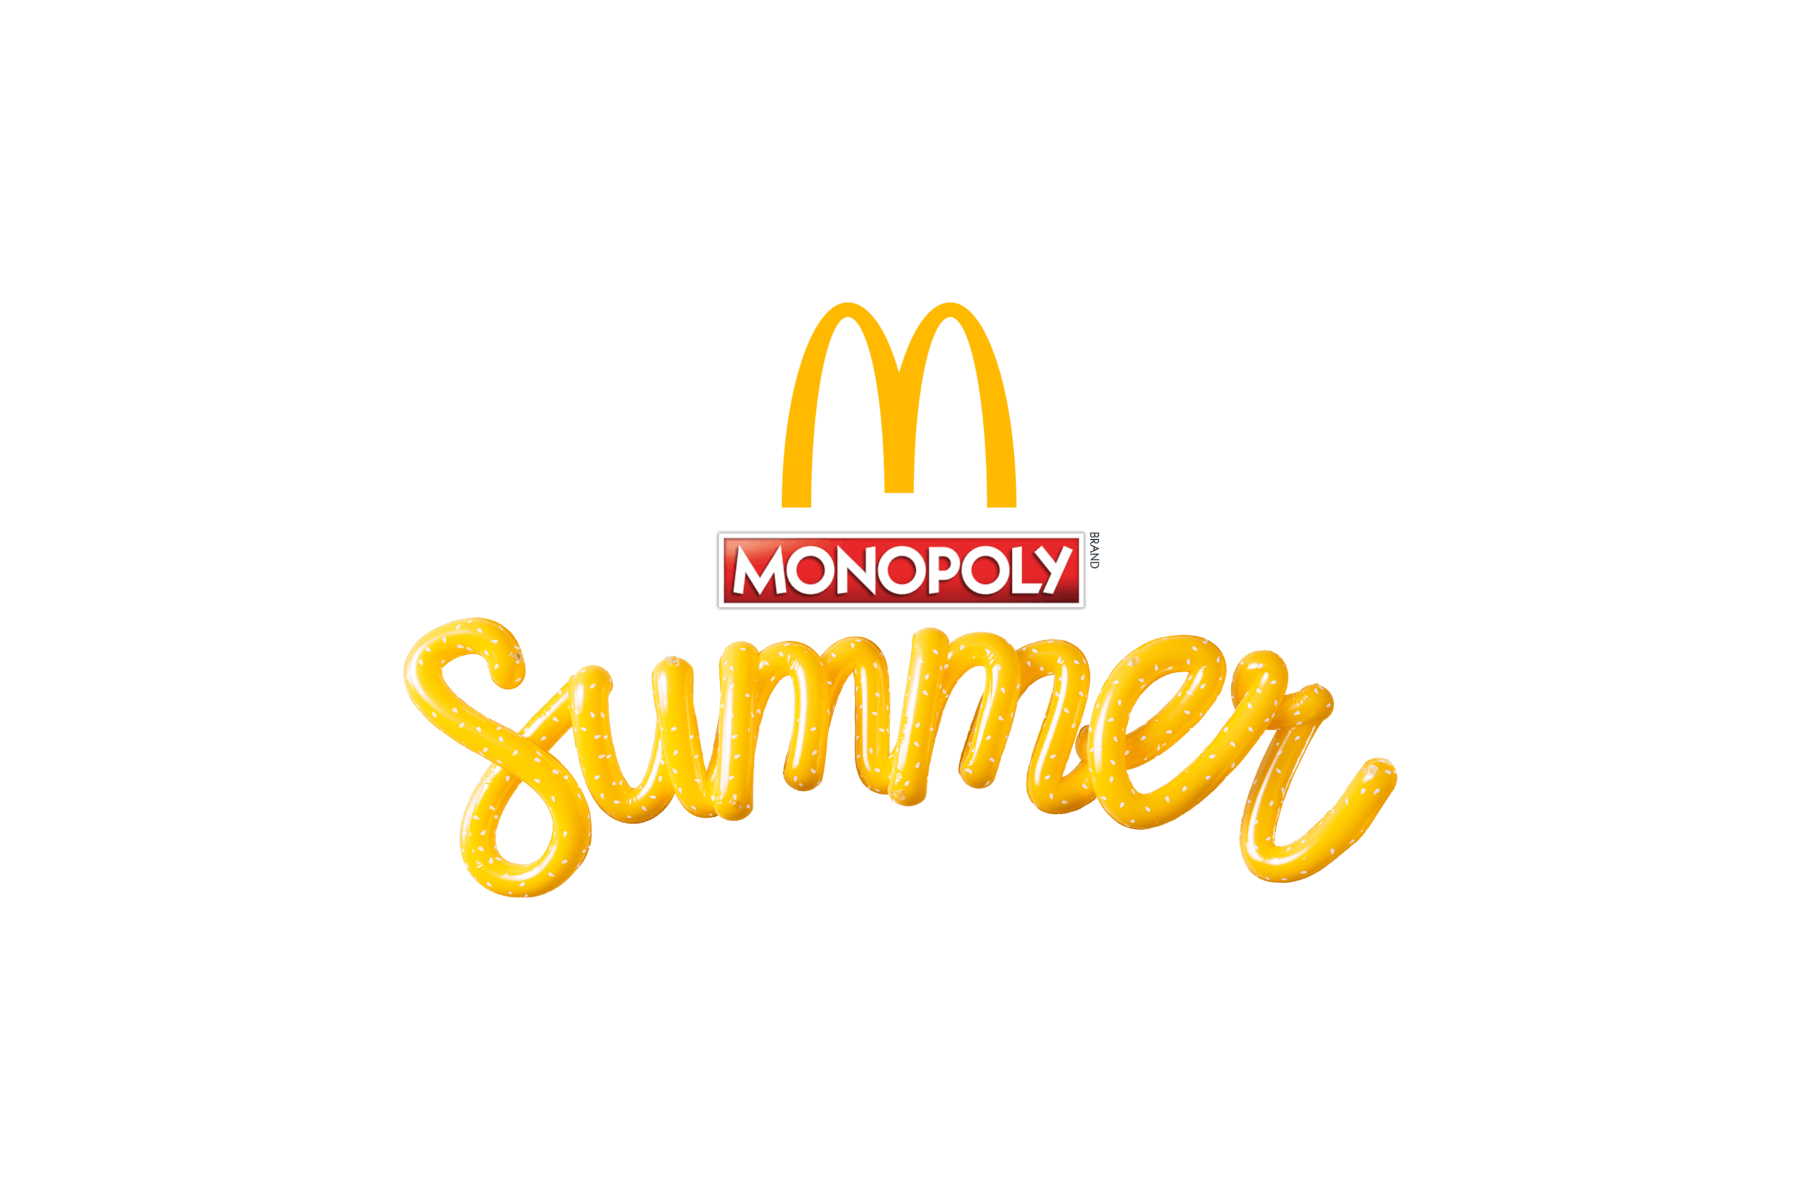 Monopoly summer